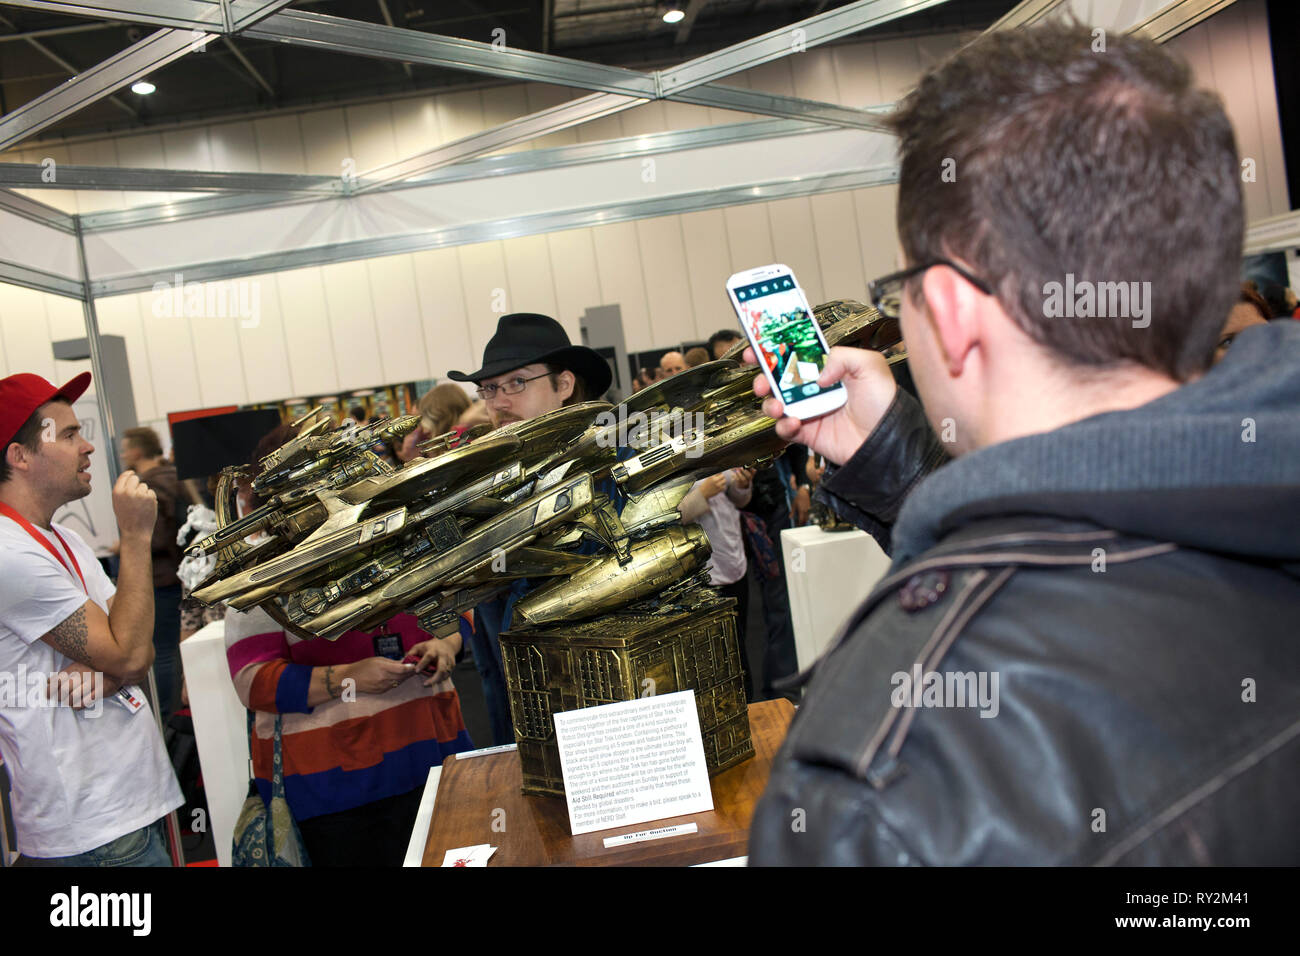 The Destination Star Trek event took place at London's ExCel centre from 19th - 21st October 2012. Stock Photo